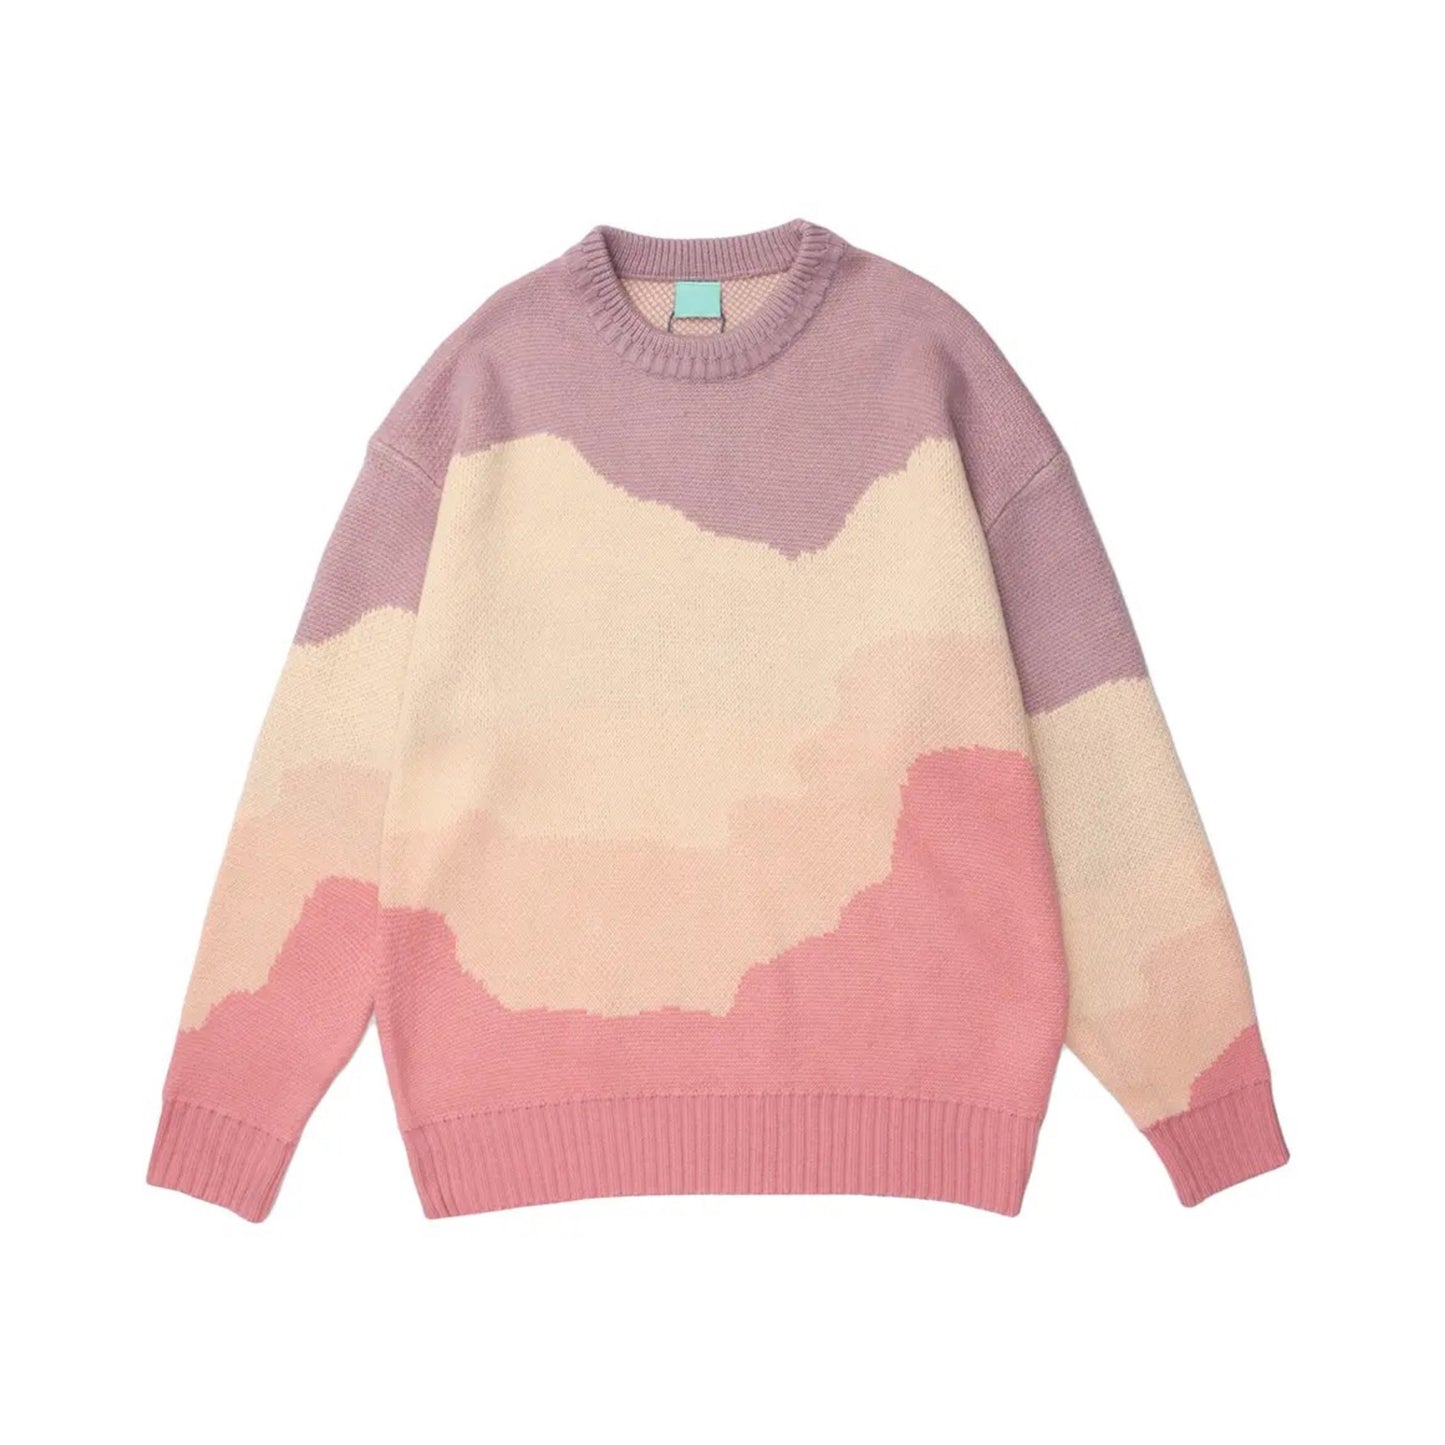 Abstract Ethereal Blend Sweater